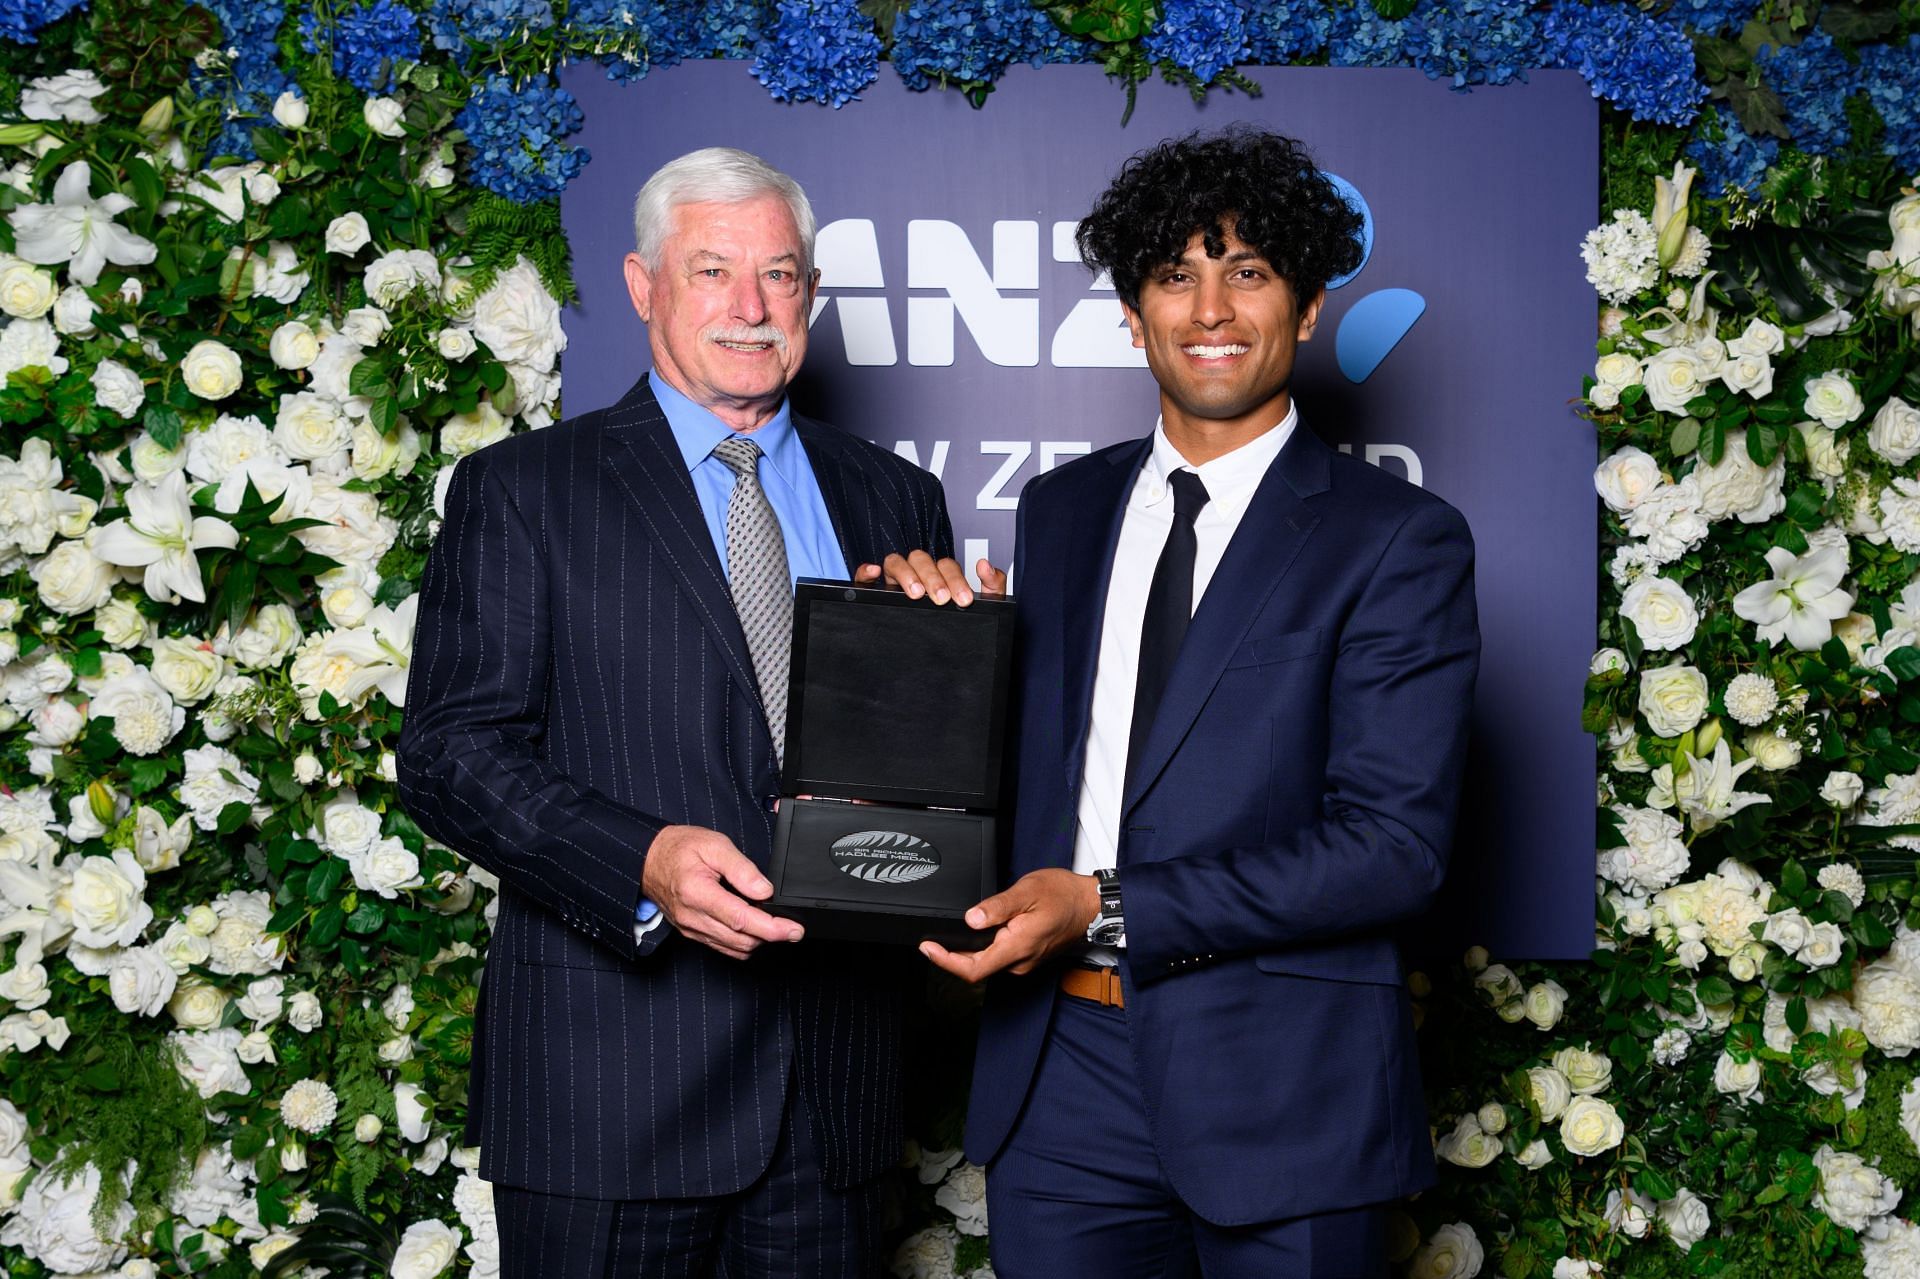 Rachin Ravindra becomes youngest New Zealand player to win Richard Hadlee Medal